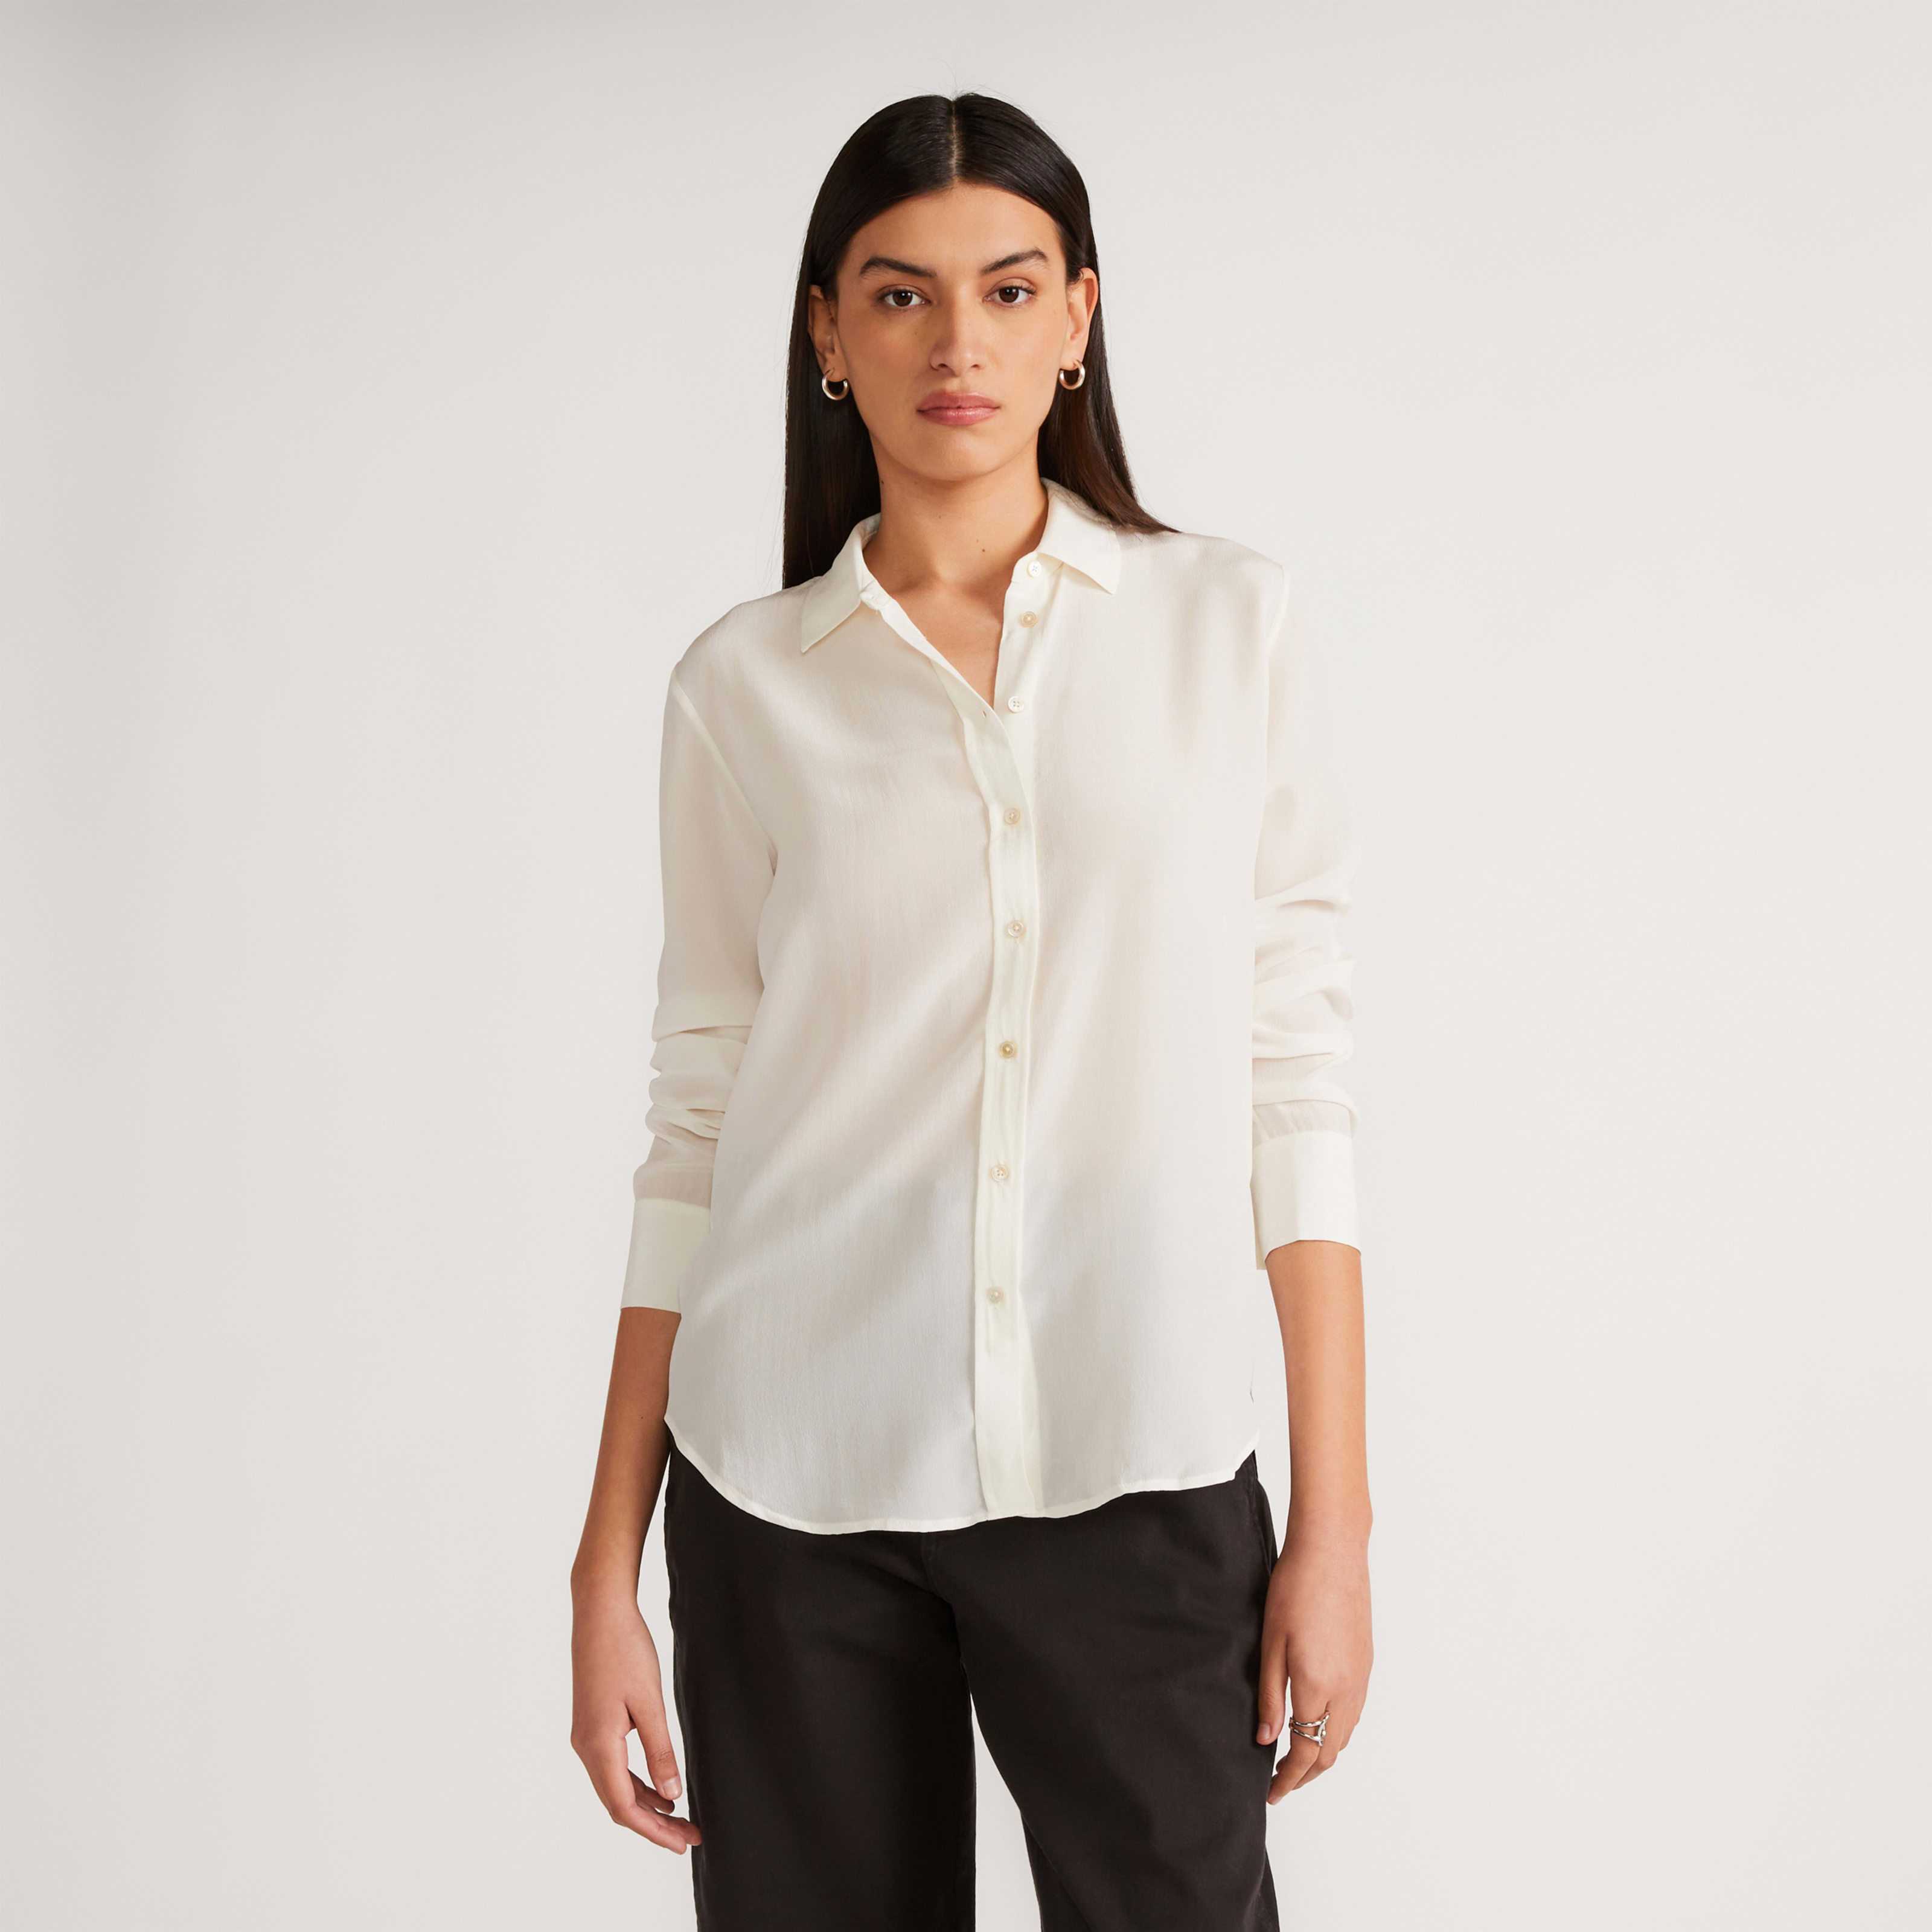 Women's Washable Clean Silk Relaxed Shirt by Everlane in Off White, Size 8